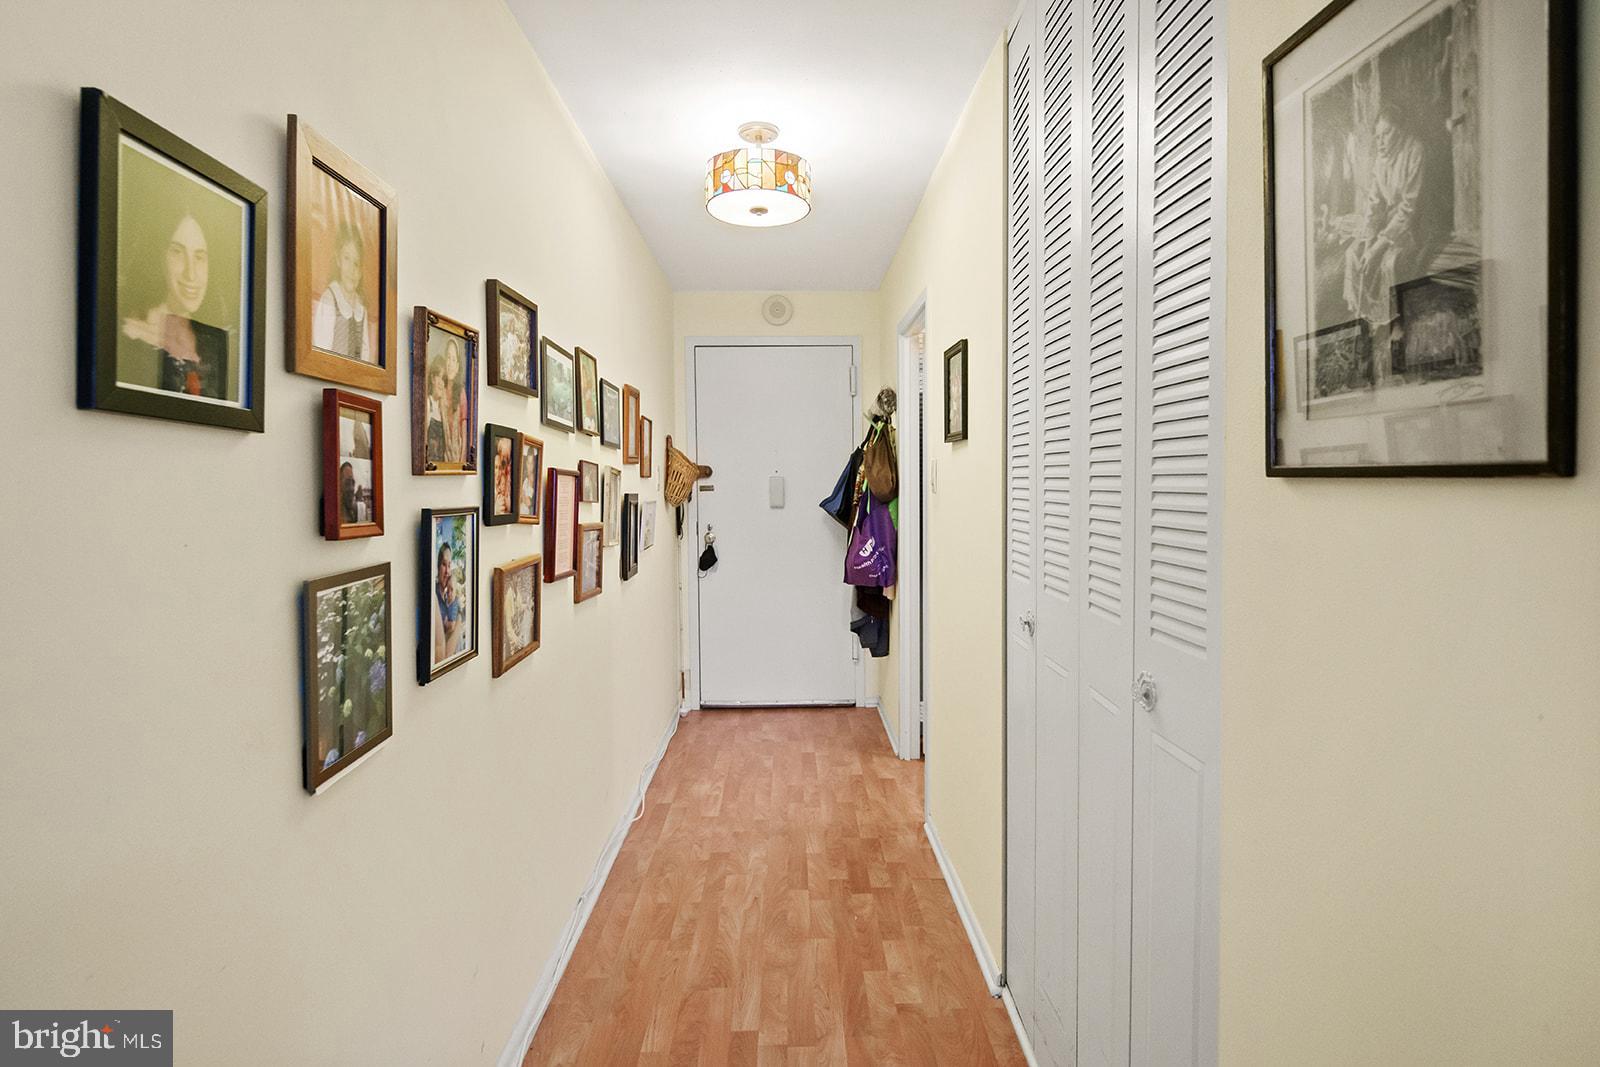 a view of a hallway with wooden floor and stairs